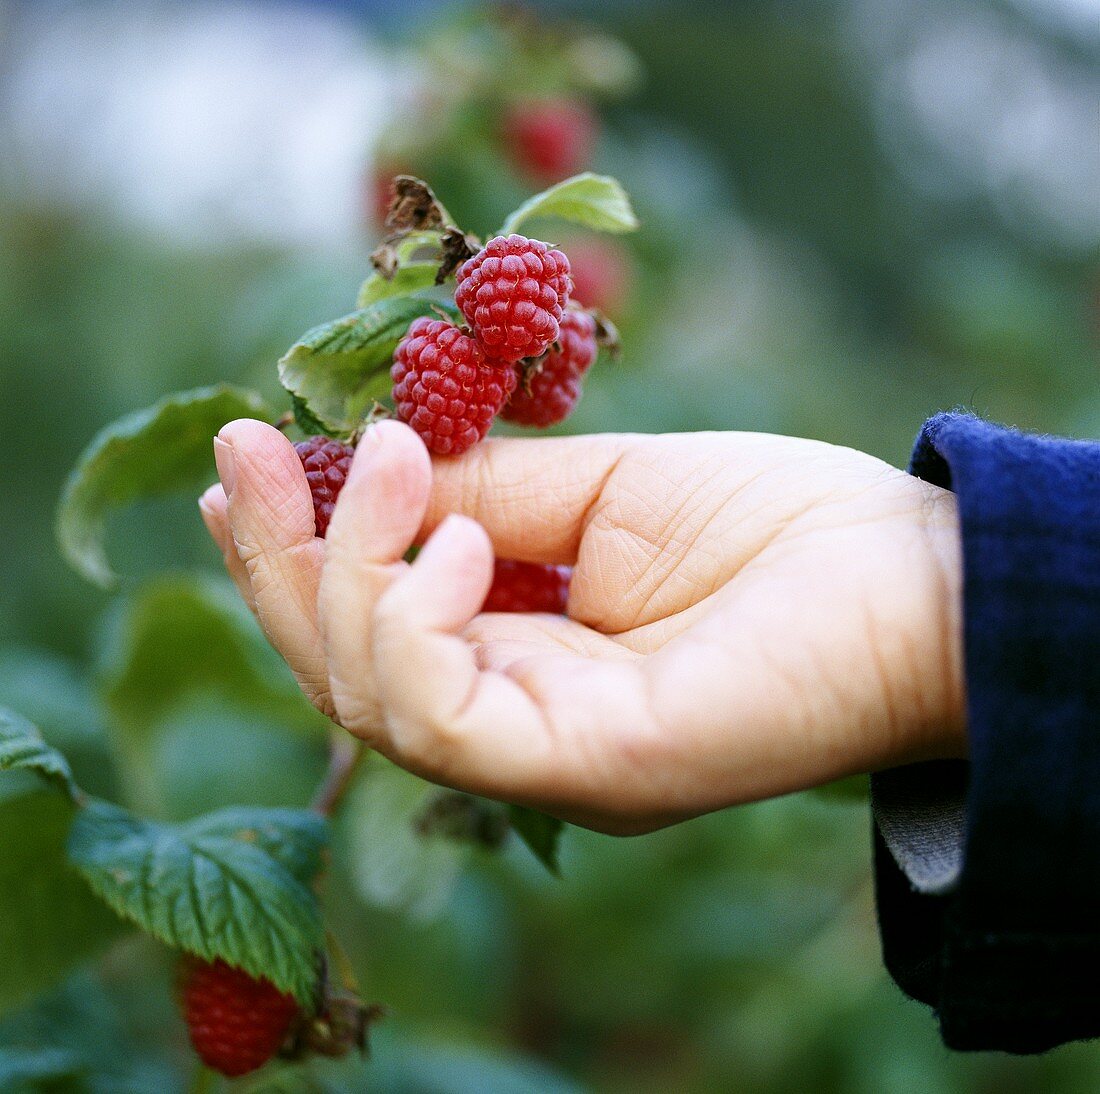 Hand reaching for raspberries on branch